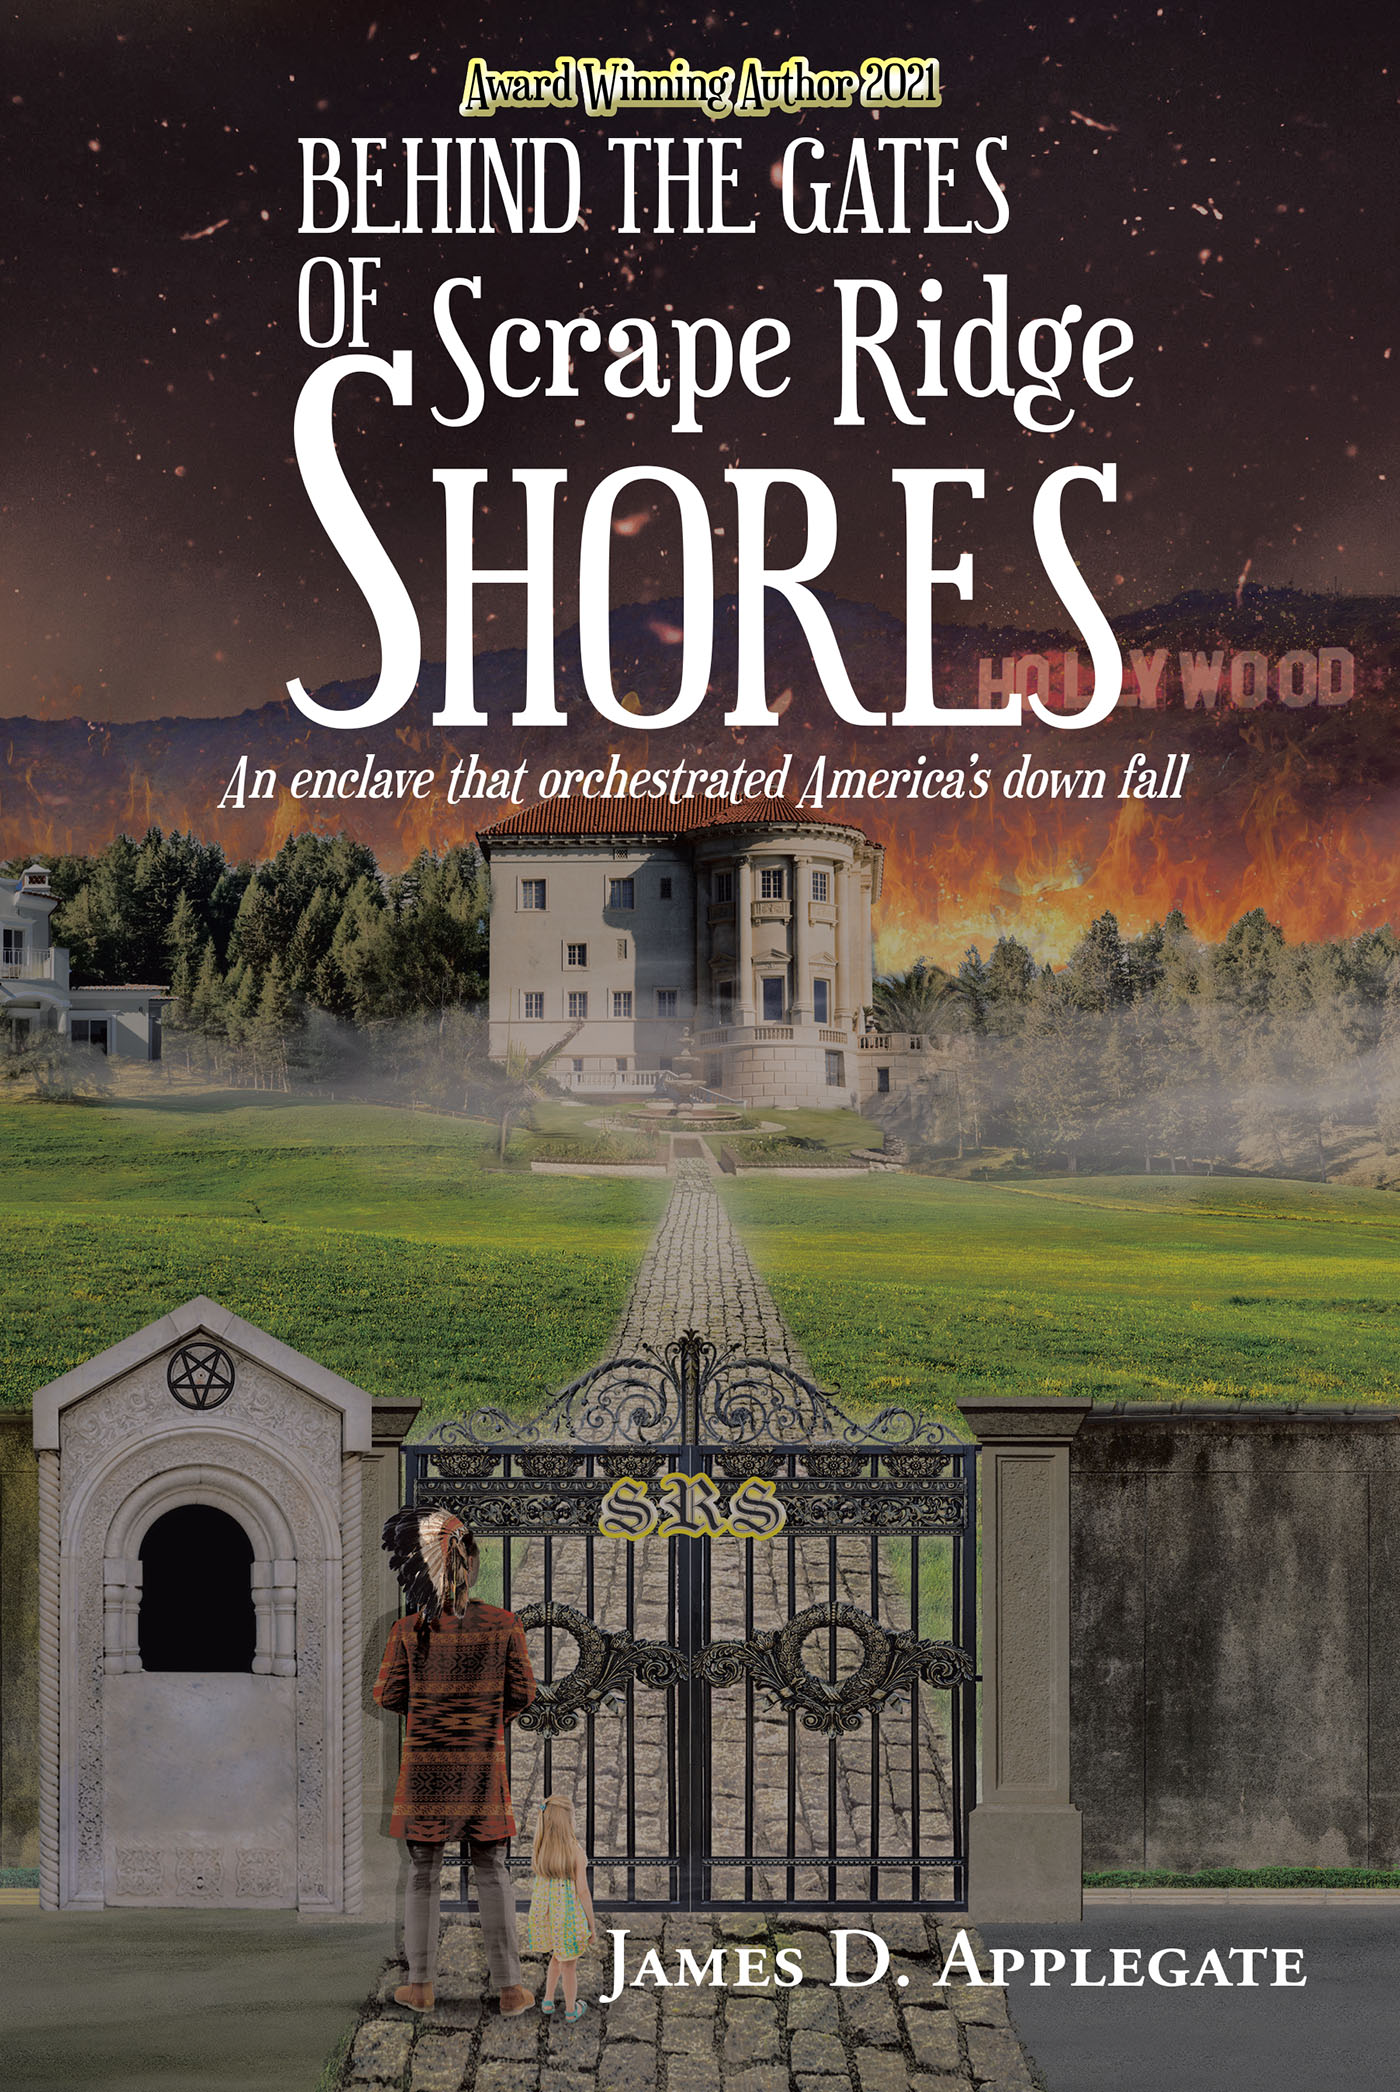 James D. Applegate’s Newly Released "Behind the Gates of Scrape Ridge Shores" is a Gripping Tale of Intermingling Fates. He Became an Award Winning Author in 2021.